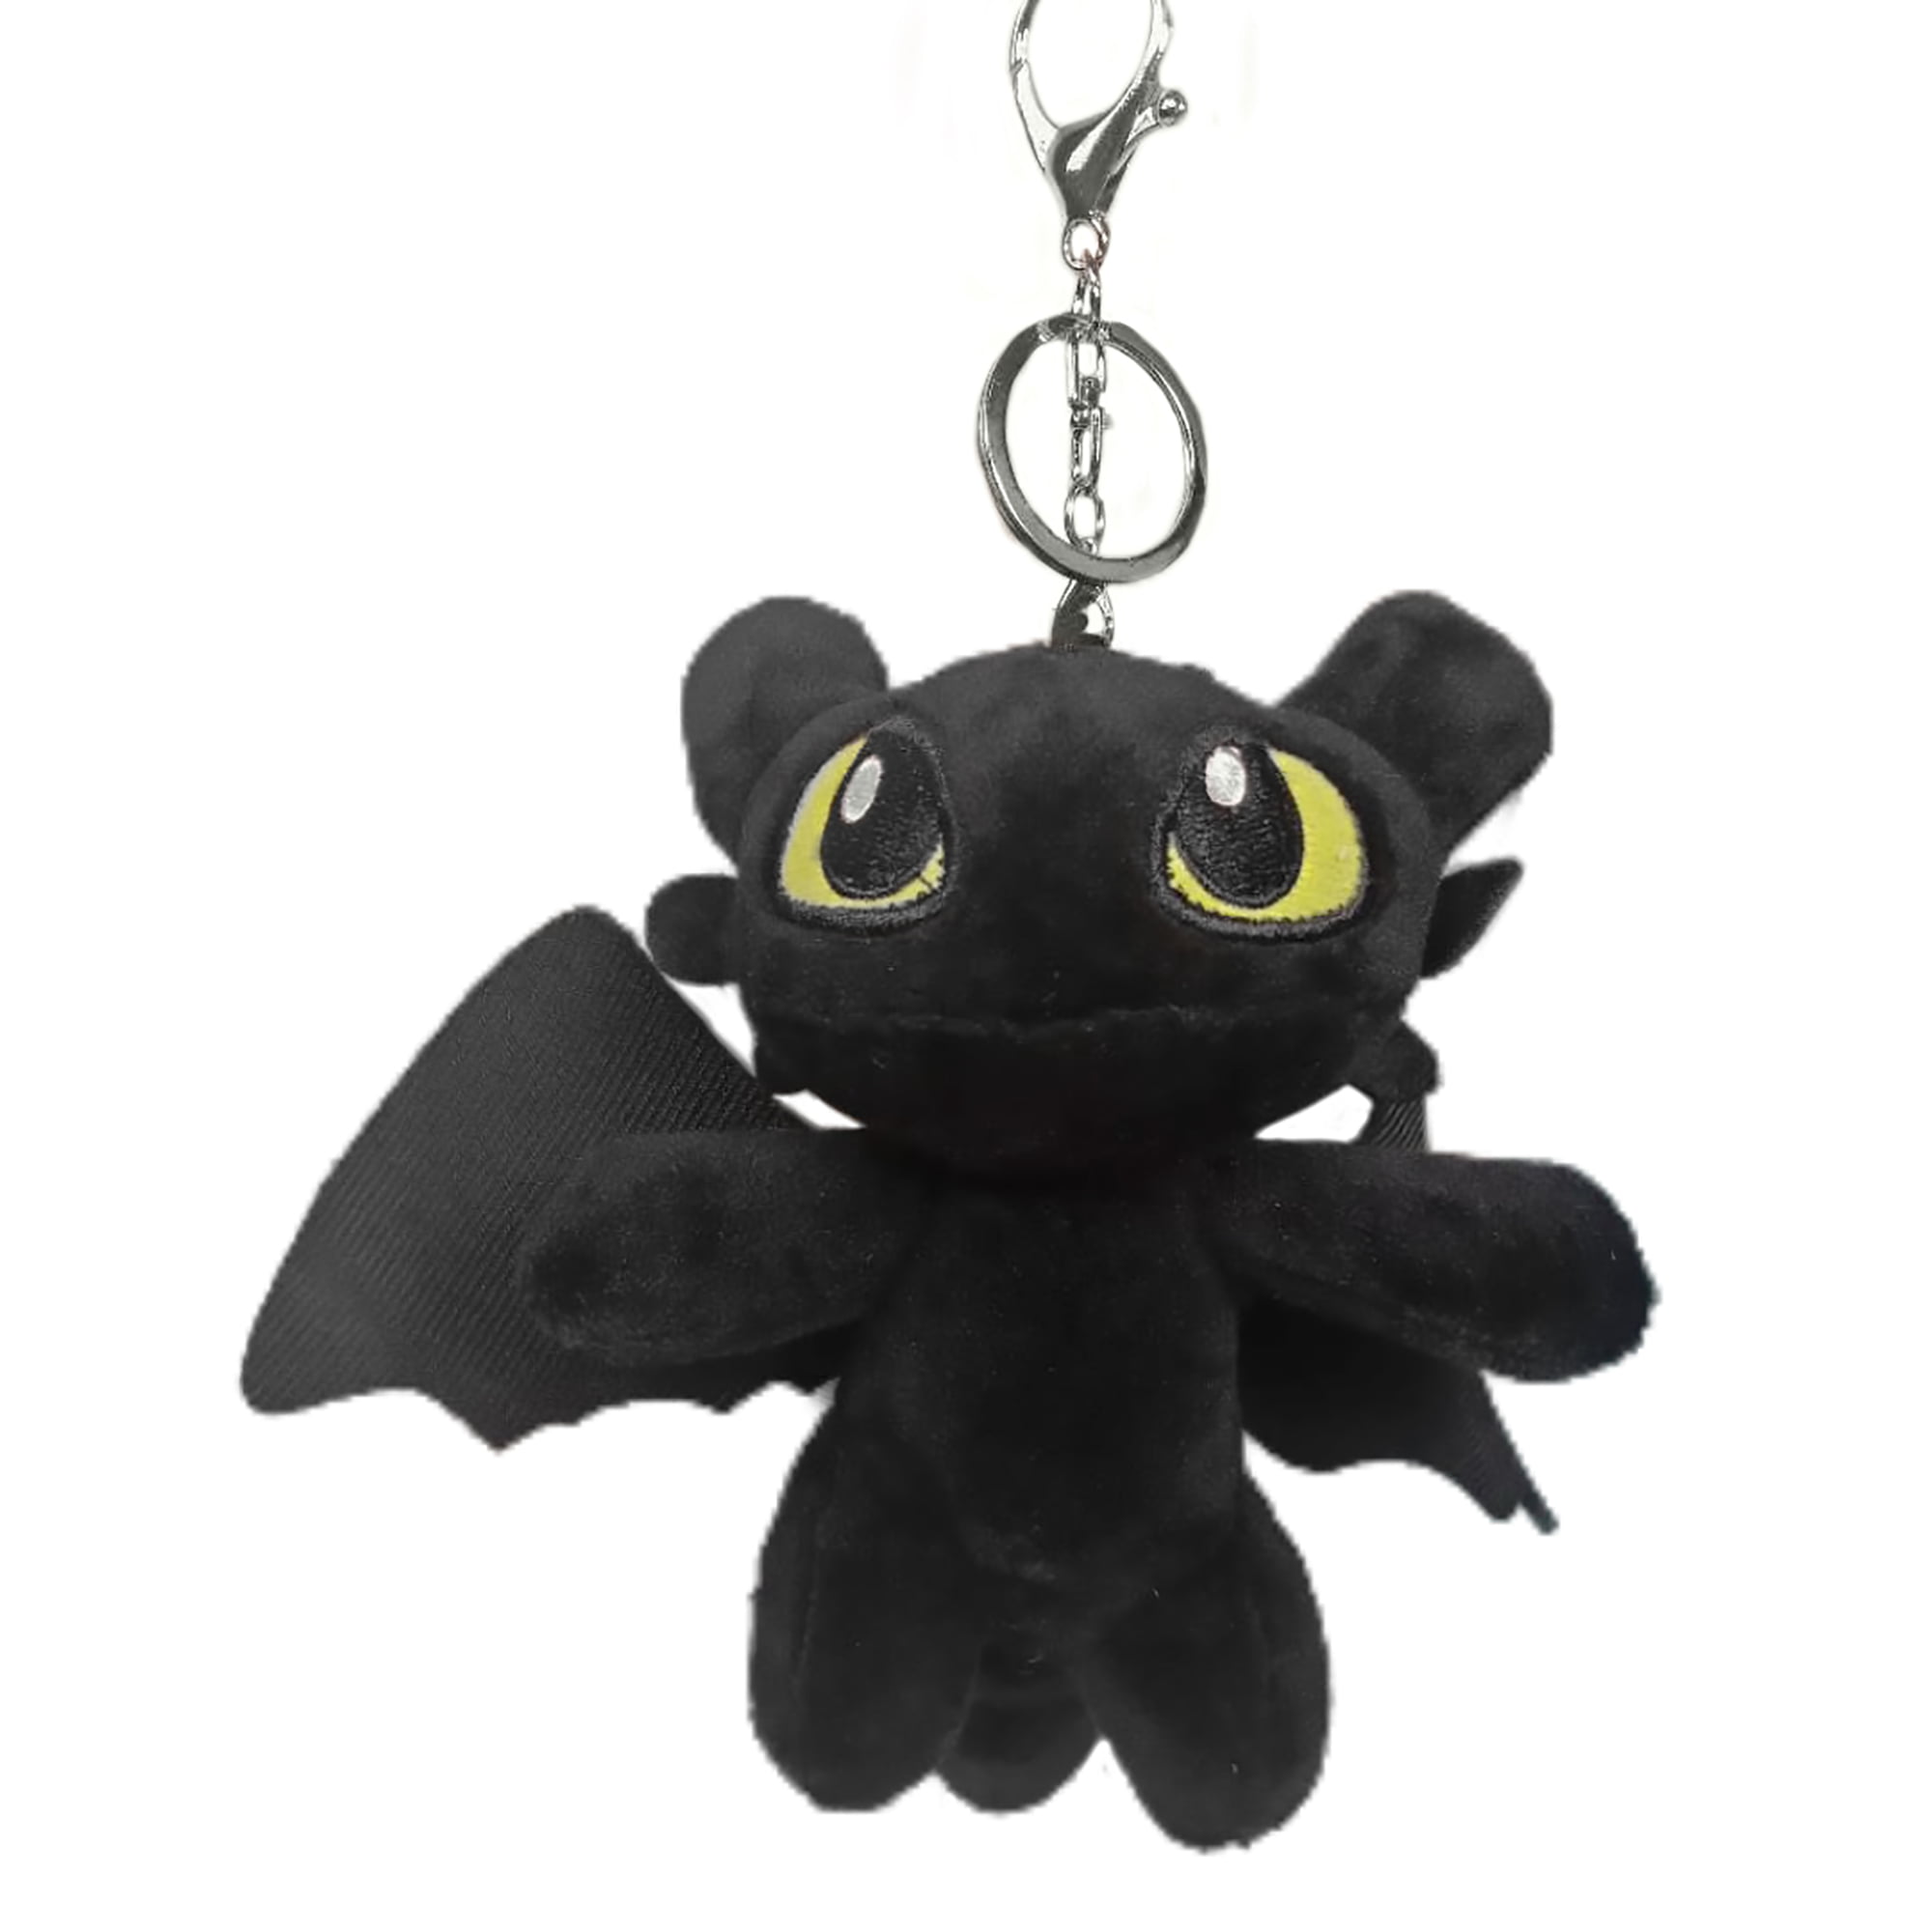 How to Train your Dragon Character Toothless Night Fury Plush Doll Soft Toy Gift 